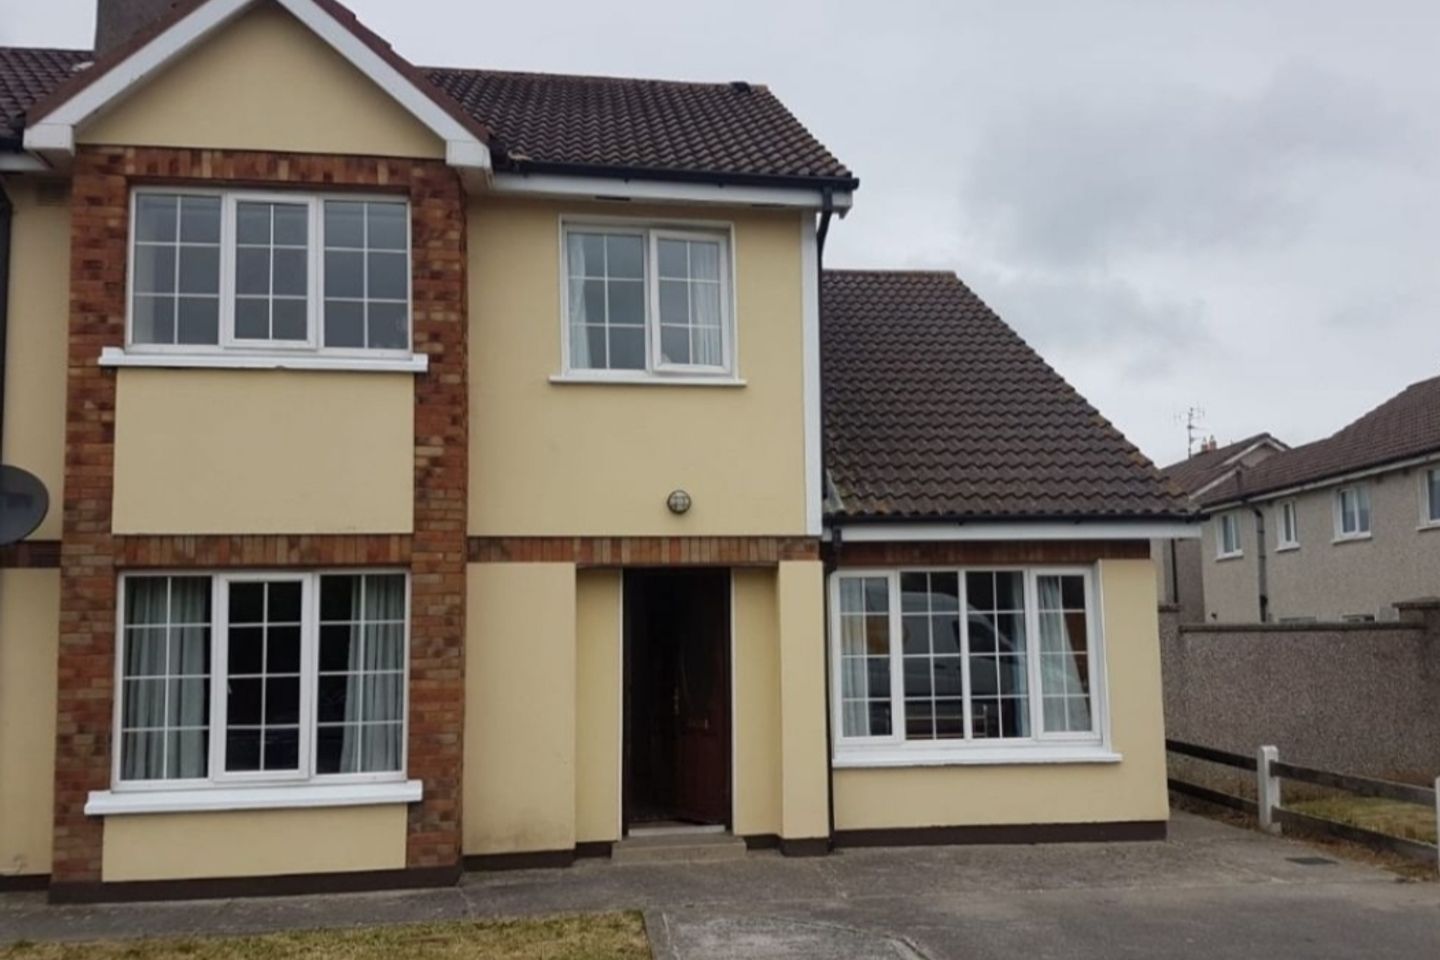 18 Briot Drive, Templars Hall, Waterford City, Co. Waterford